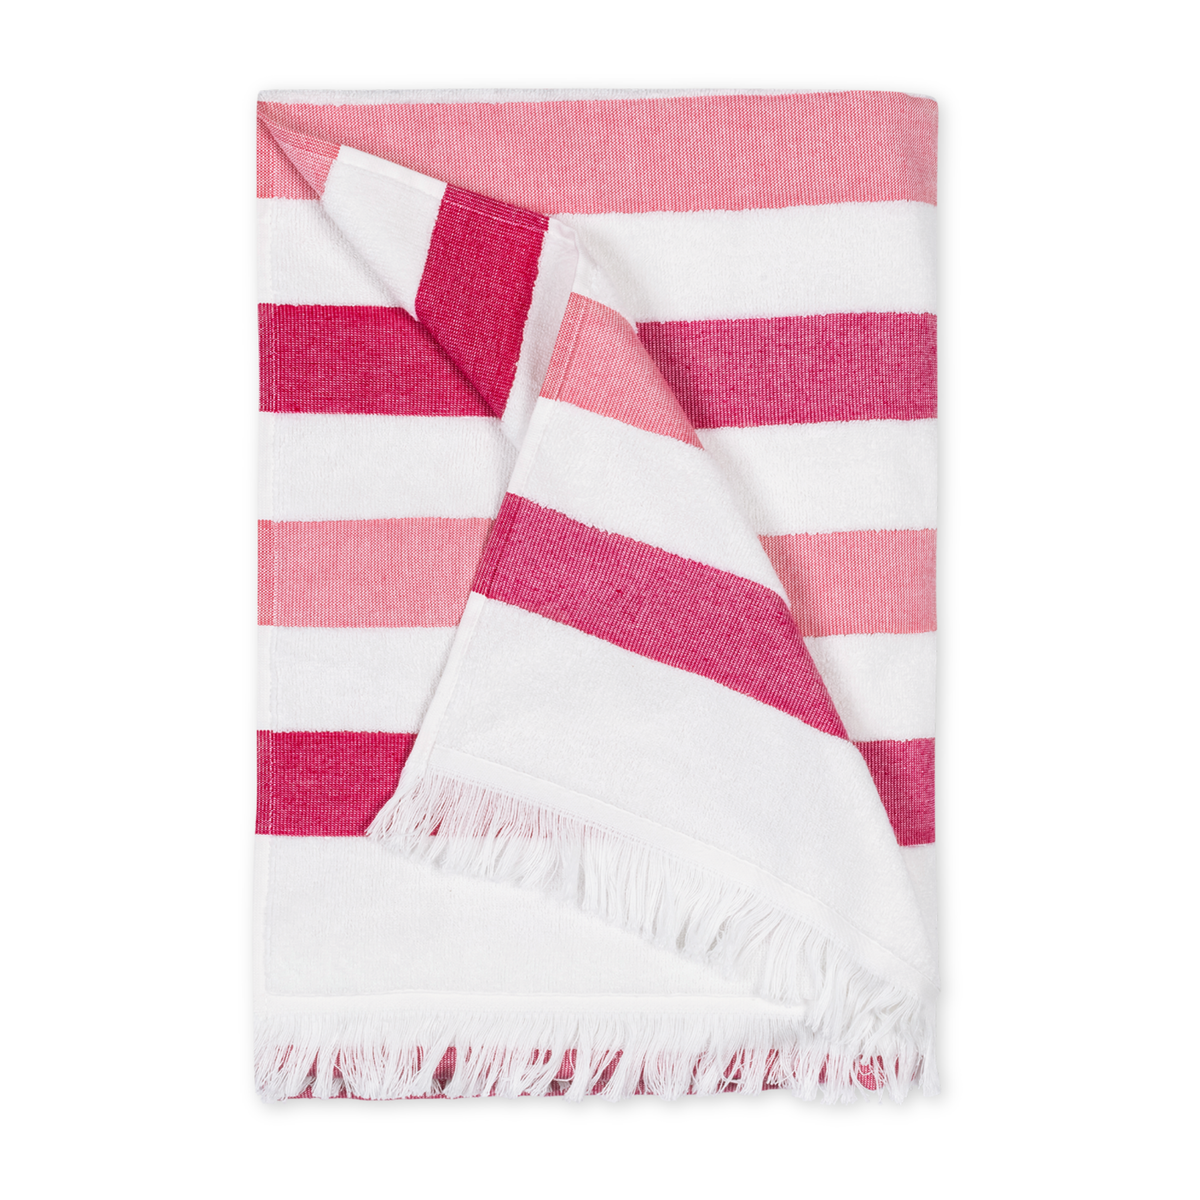 Folded Matouk Amado Pool and Beach Towels in Candy Stripe Color